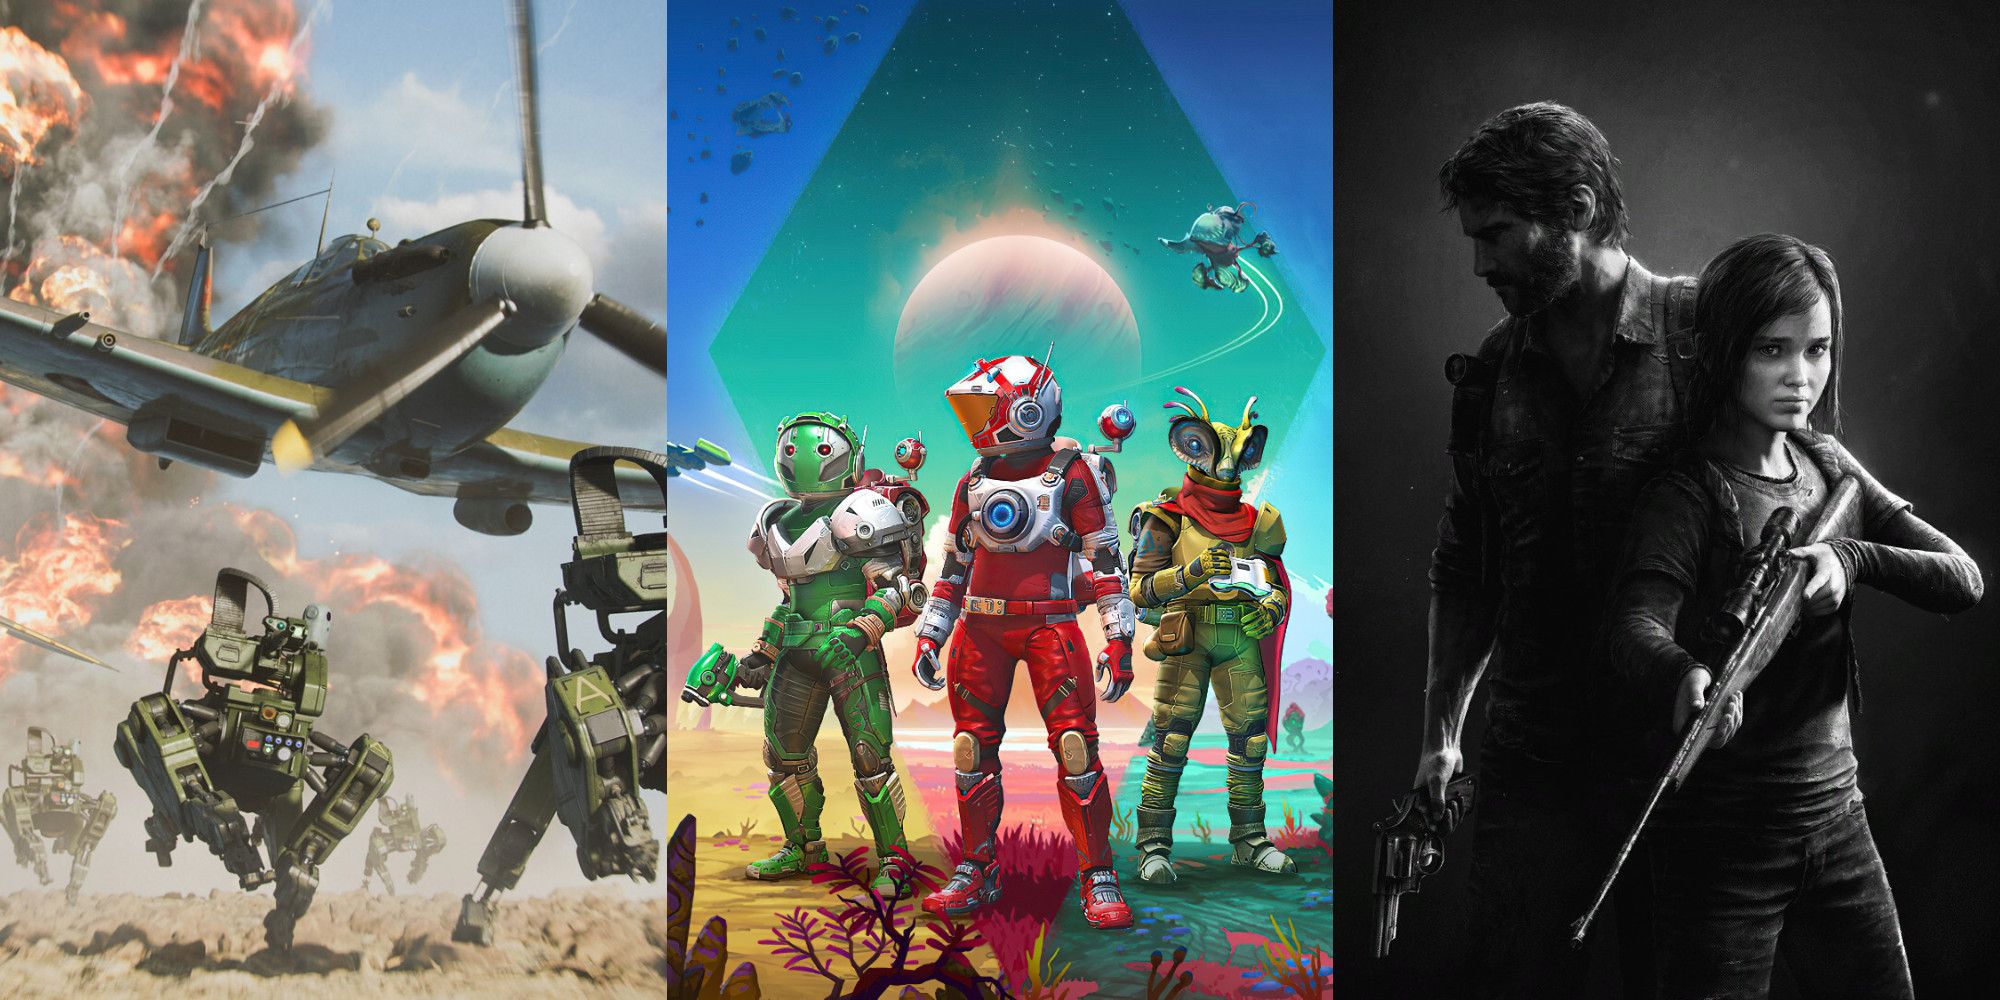 Machines from Battlefield 2042, characters in no man's Sky, and Joel and Ellie from The Last Of Us